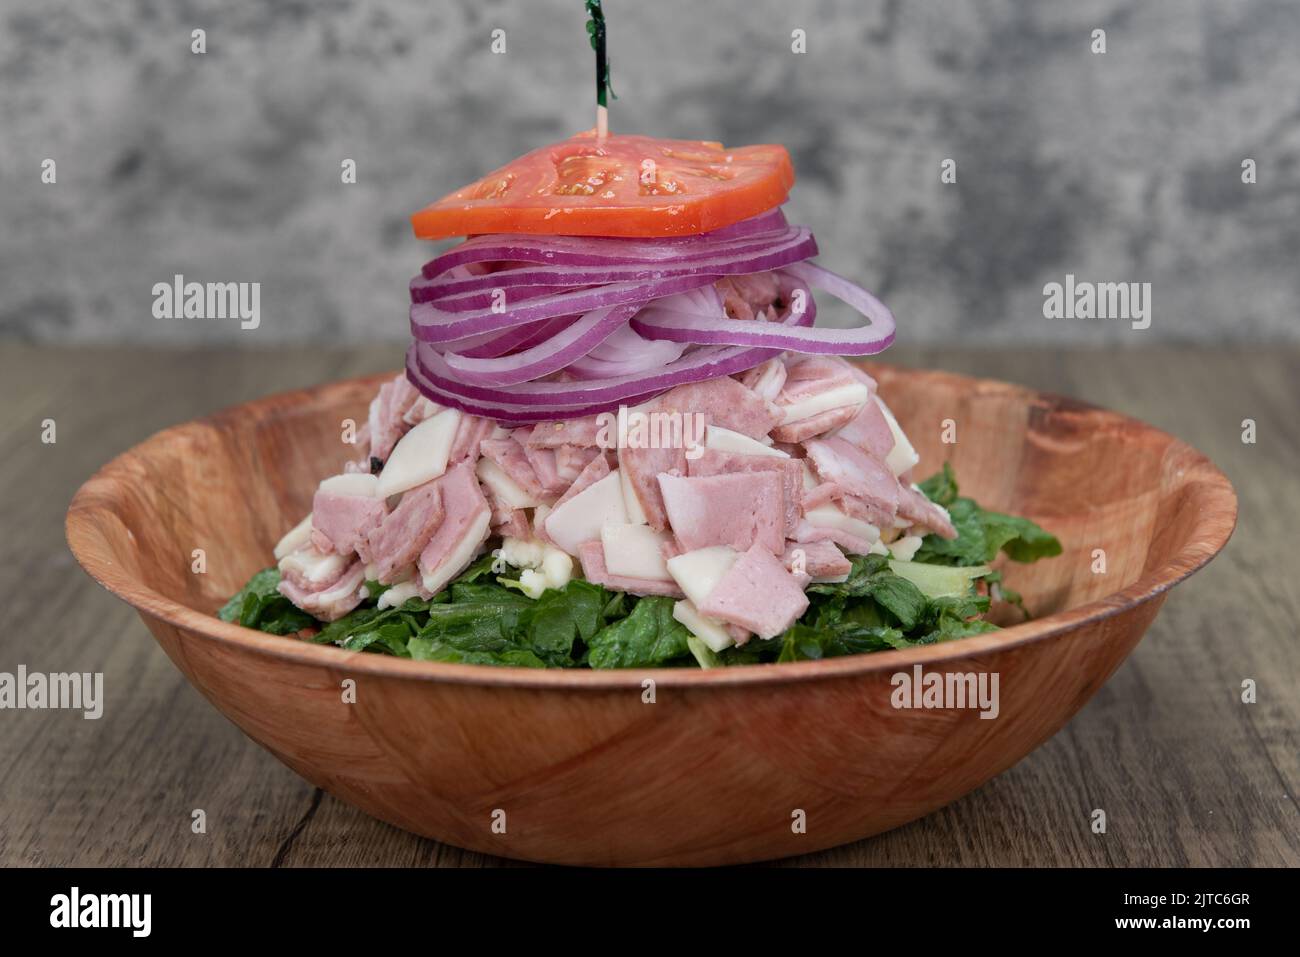 Antipasto salad is delicately balanced tall with pepperoni, cotto salami, and romaine lettuce is a meal within itself. Stock Photo